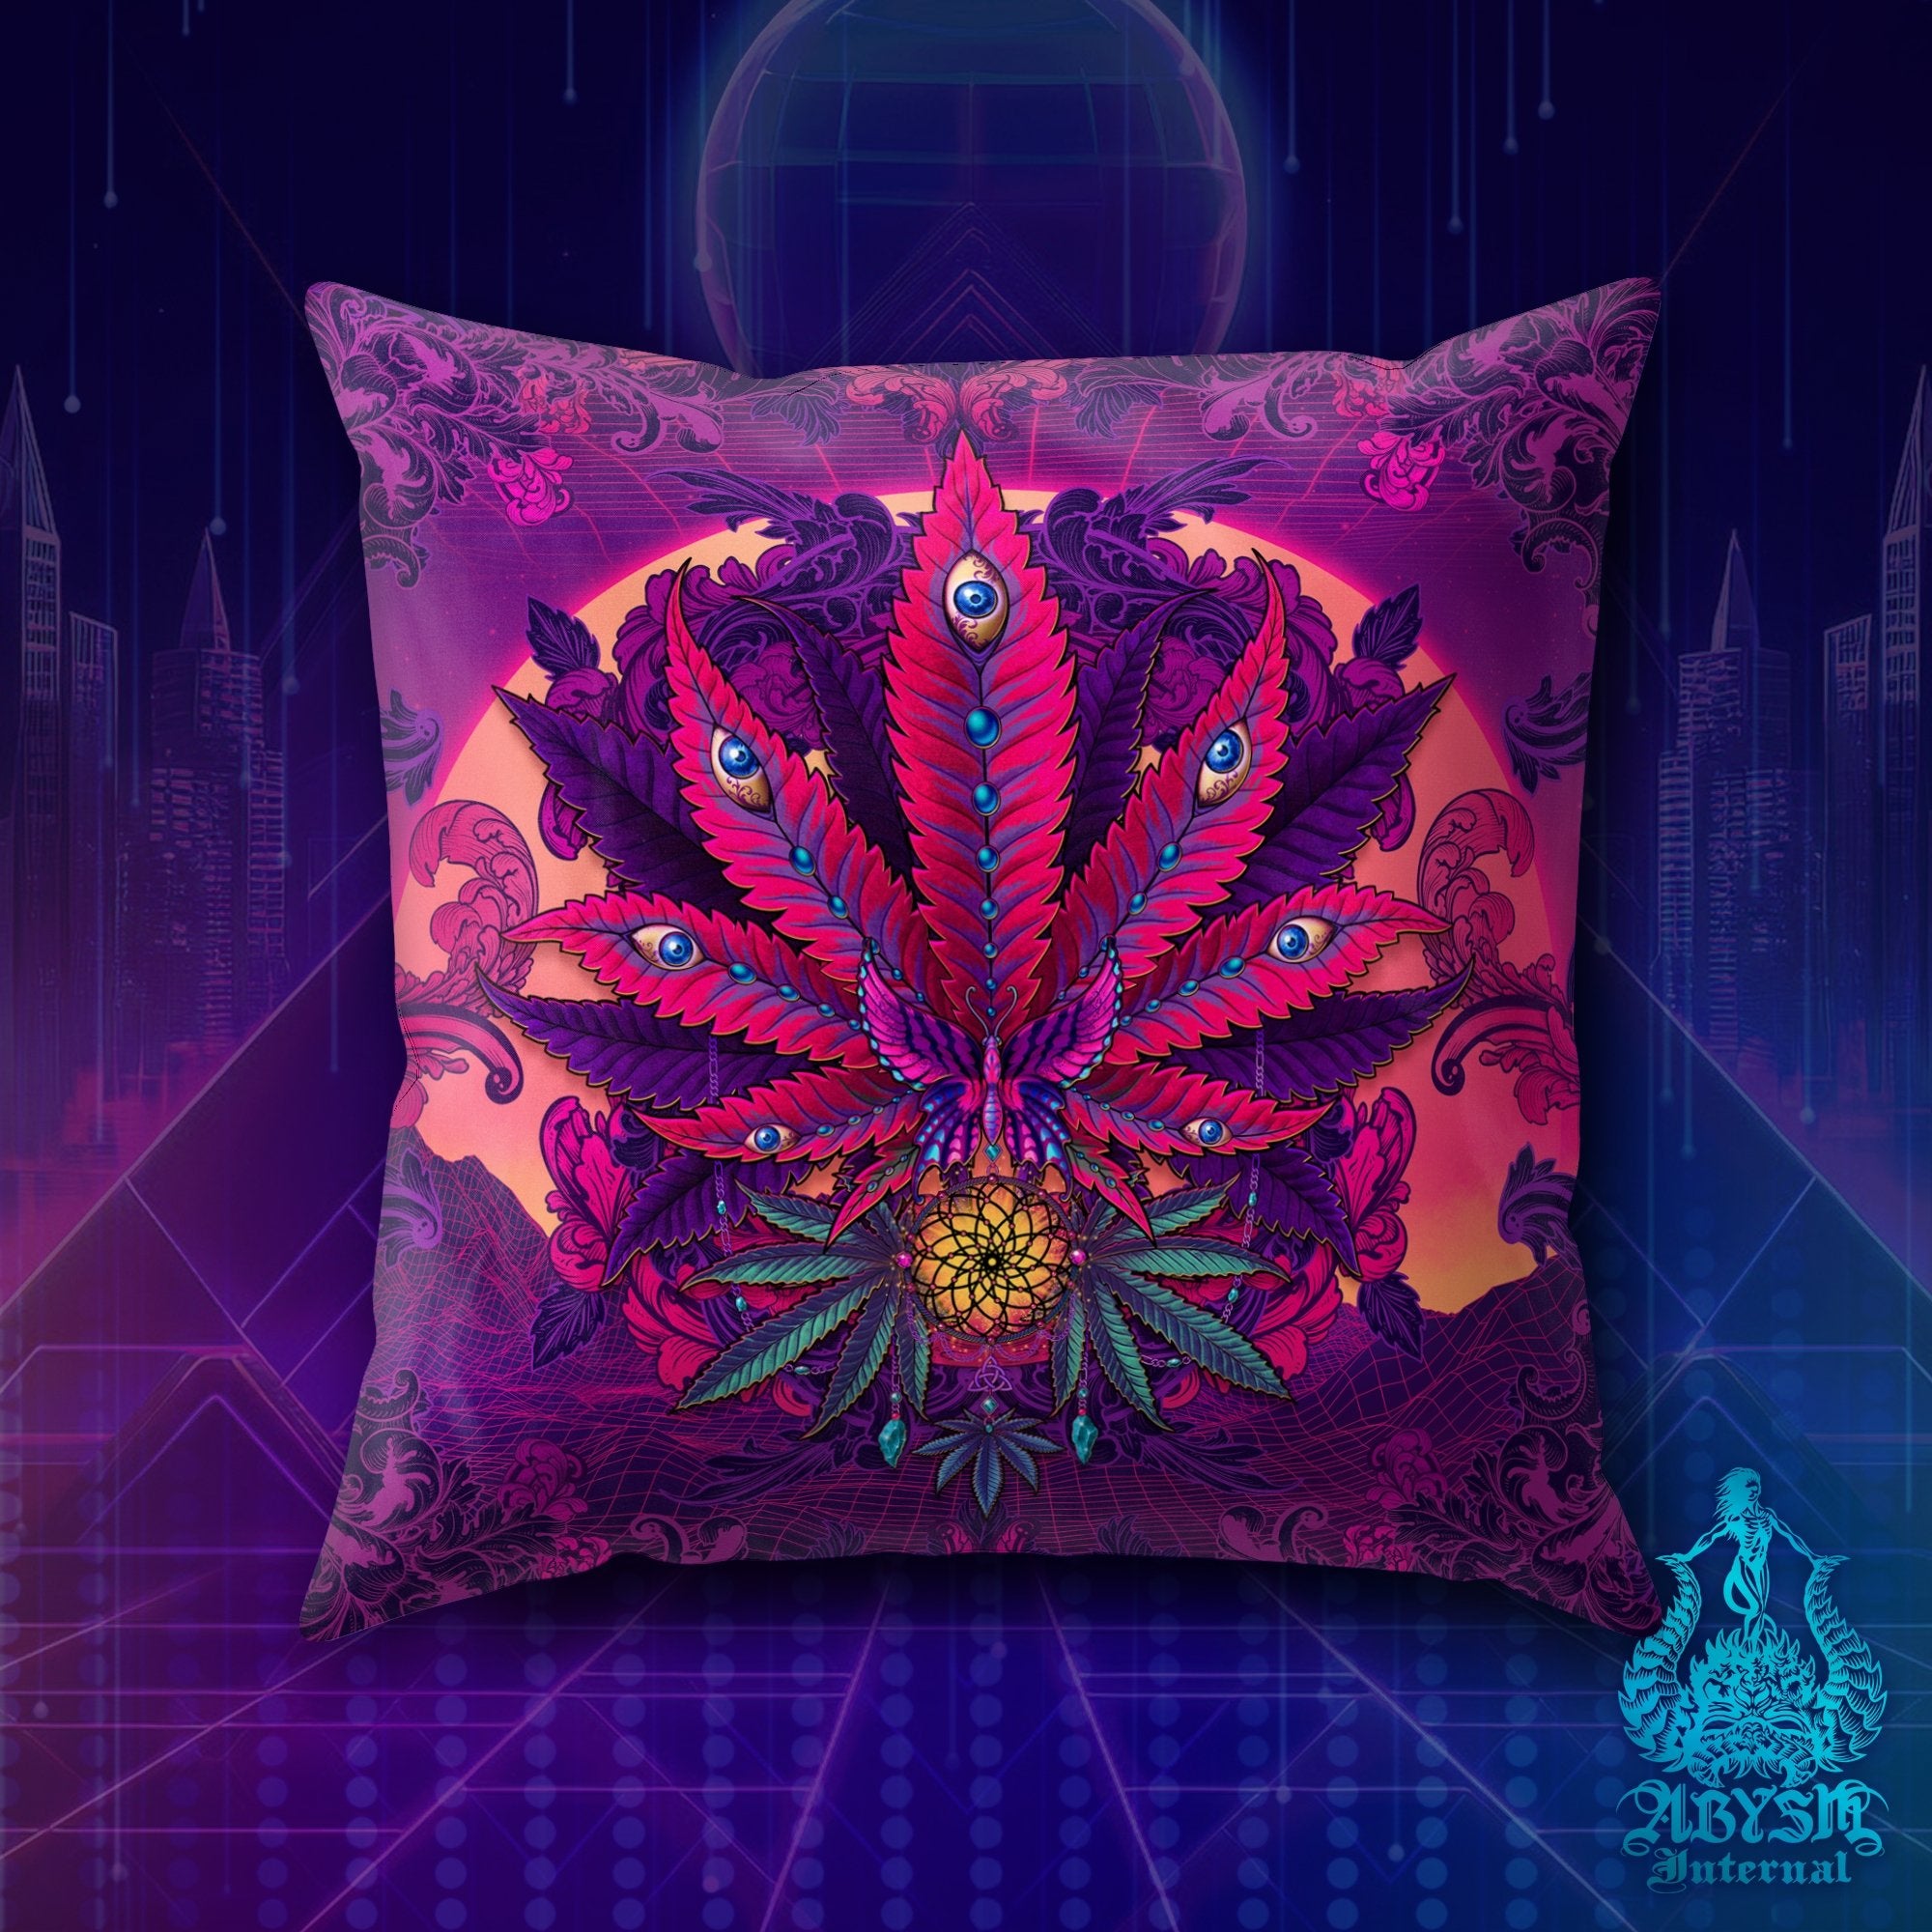 Psychedelic Weed Throw Pillow, Cannabis Shop Decor, Vaporwave Decorative Accent Cushion, Retrowave 80s Room Decor, Synthwave 420 Art Print - Abysm Internal